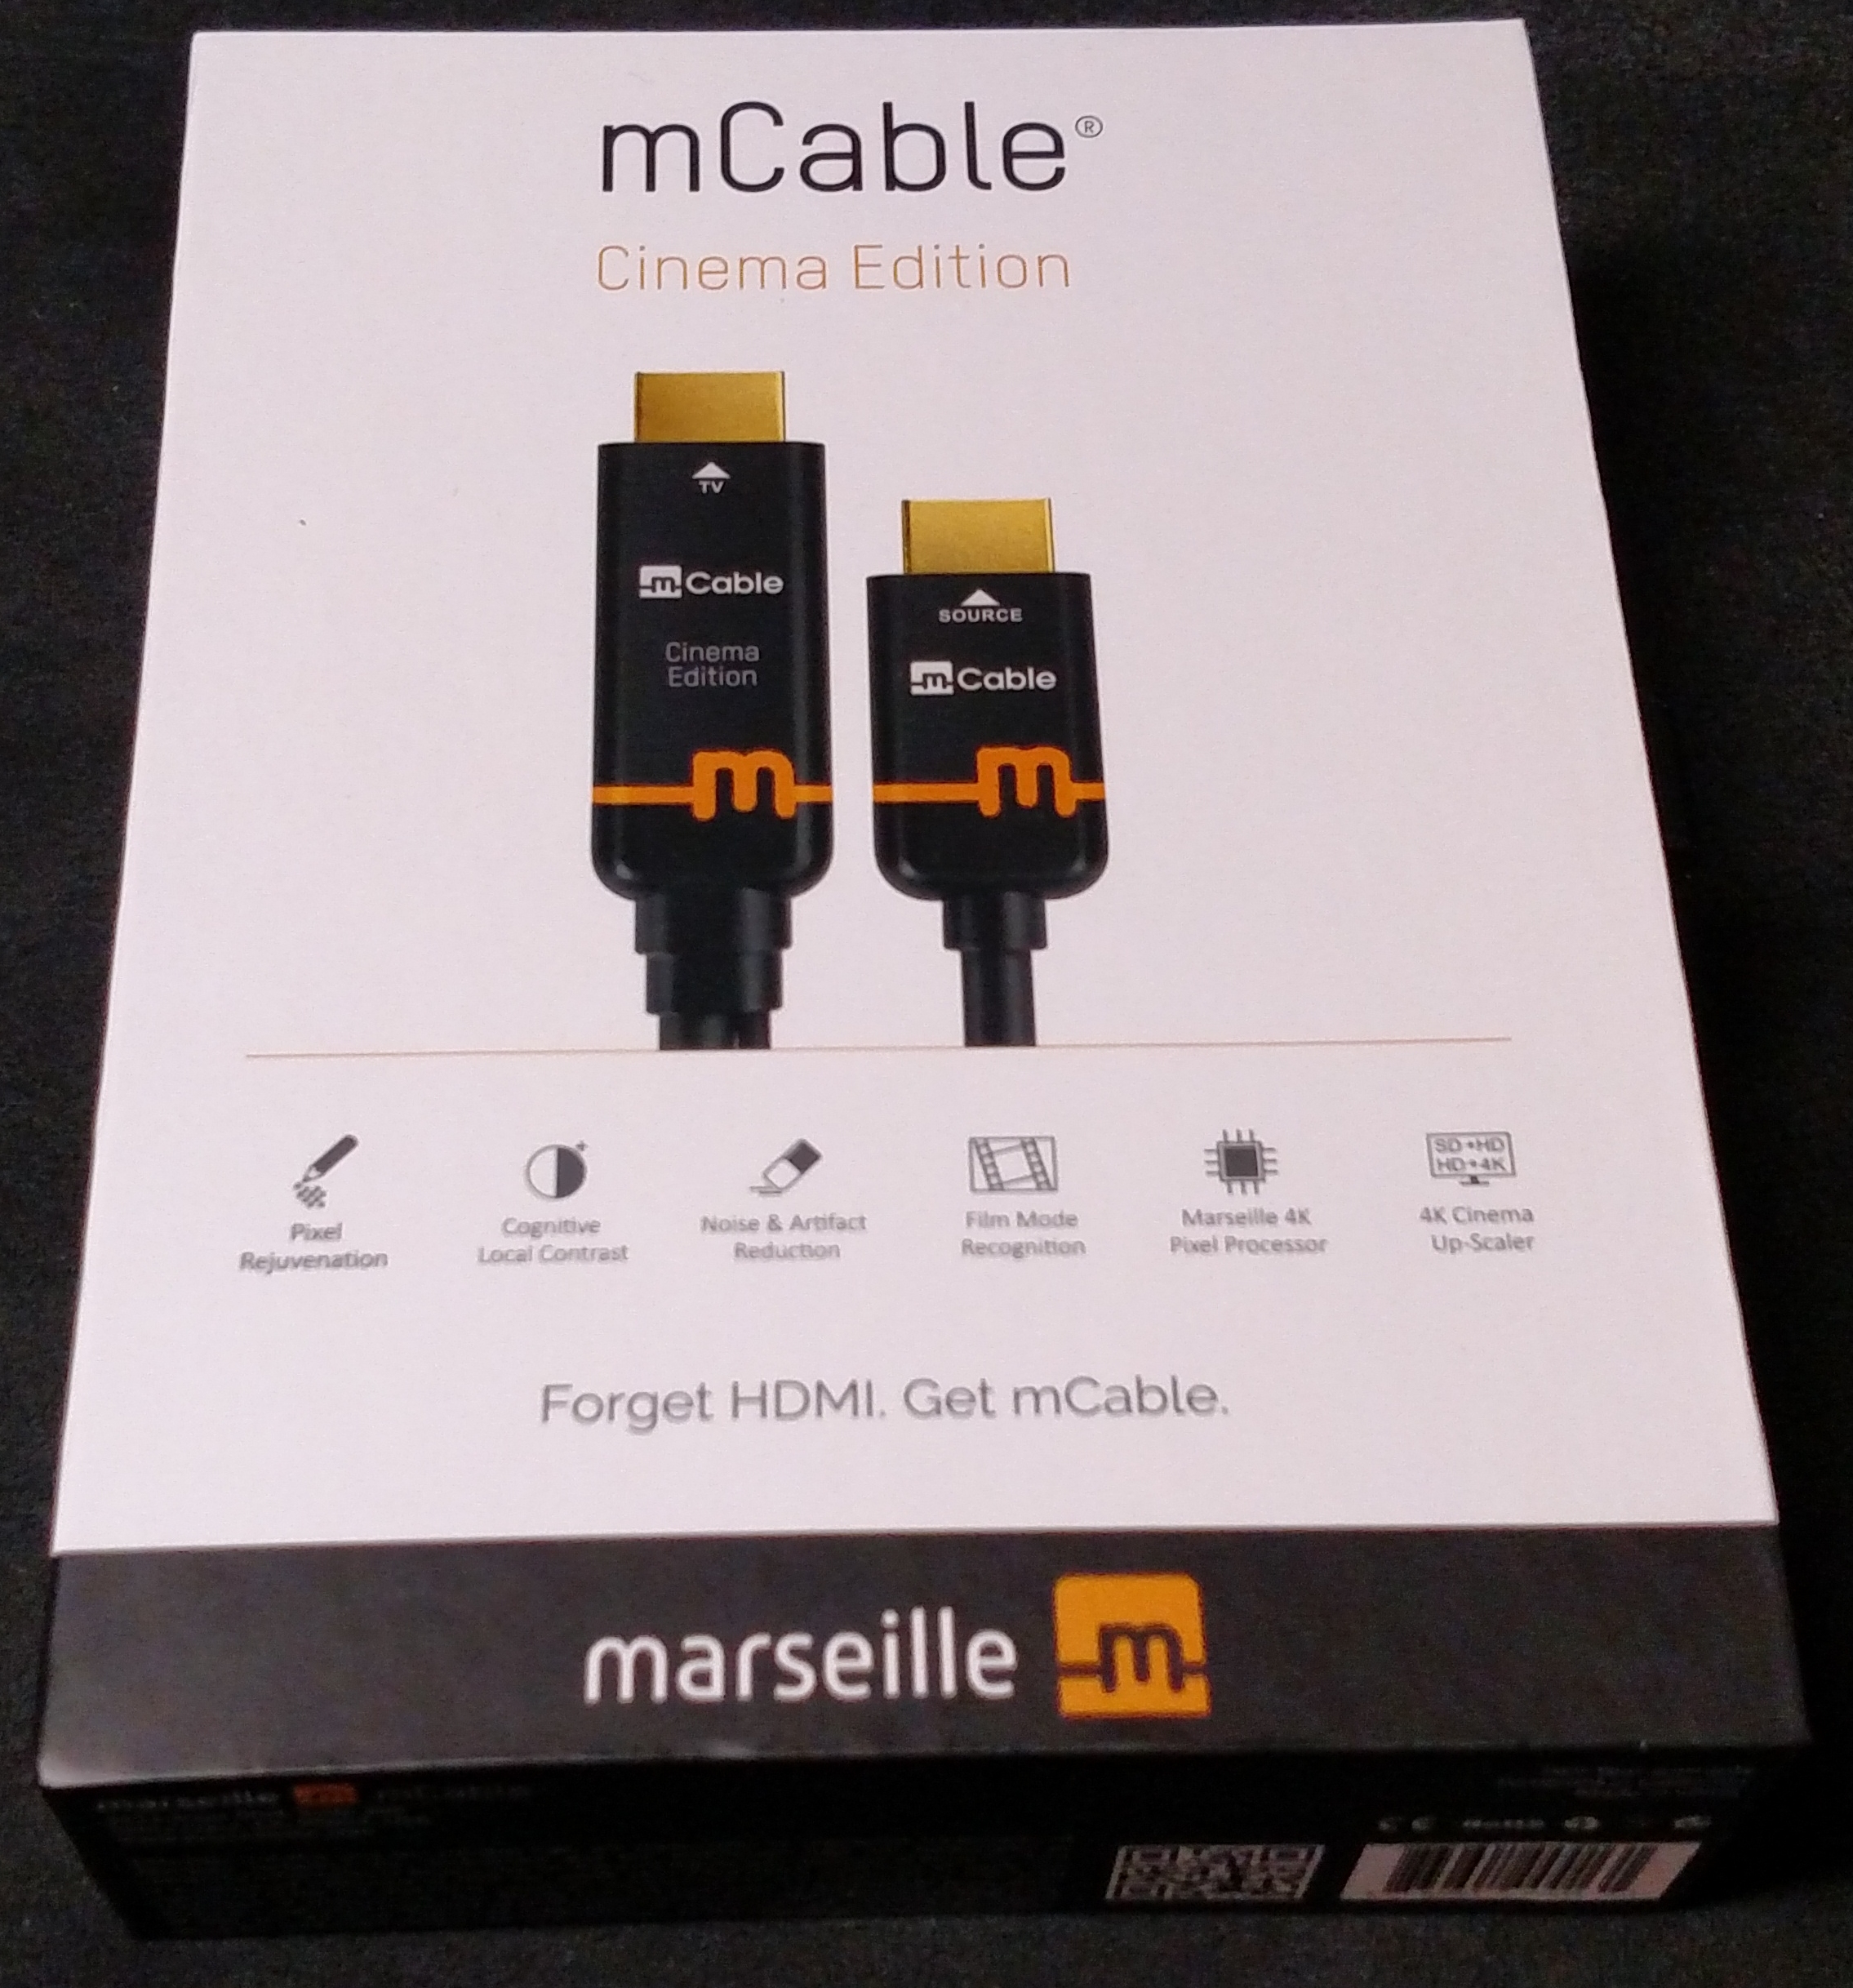 mCable Box